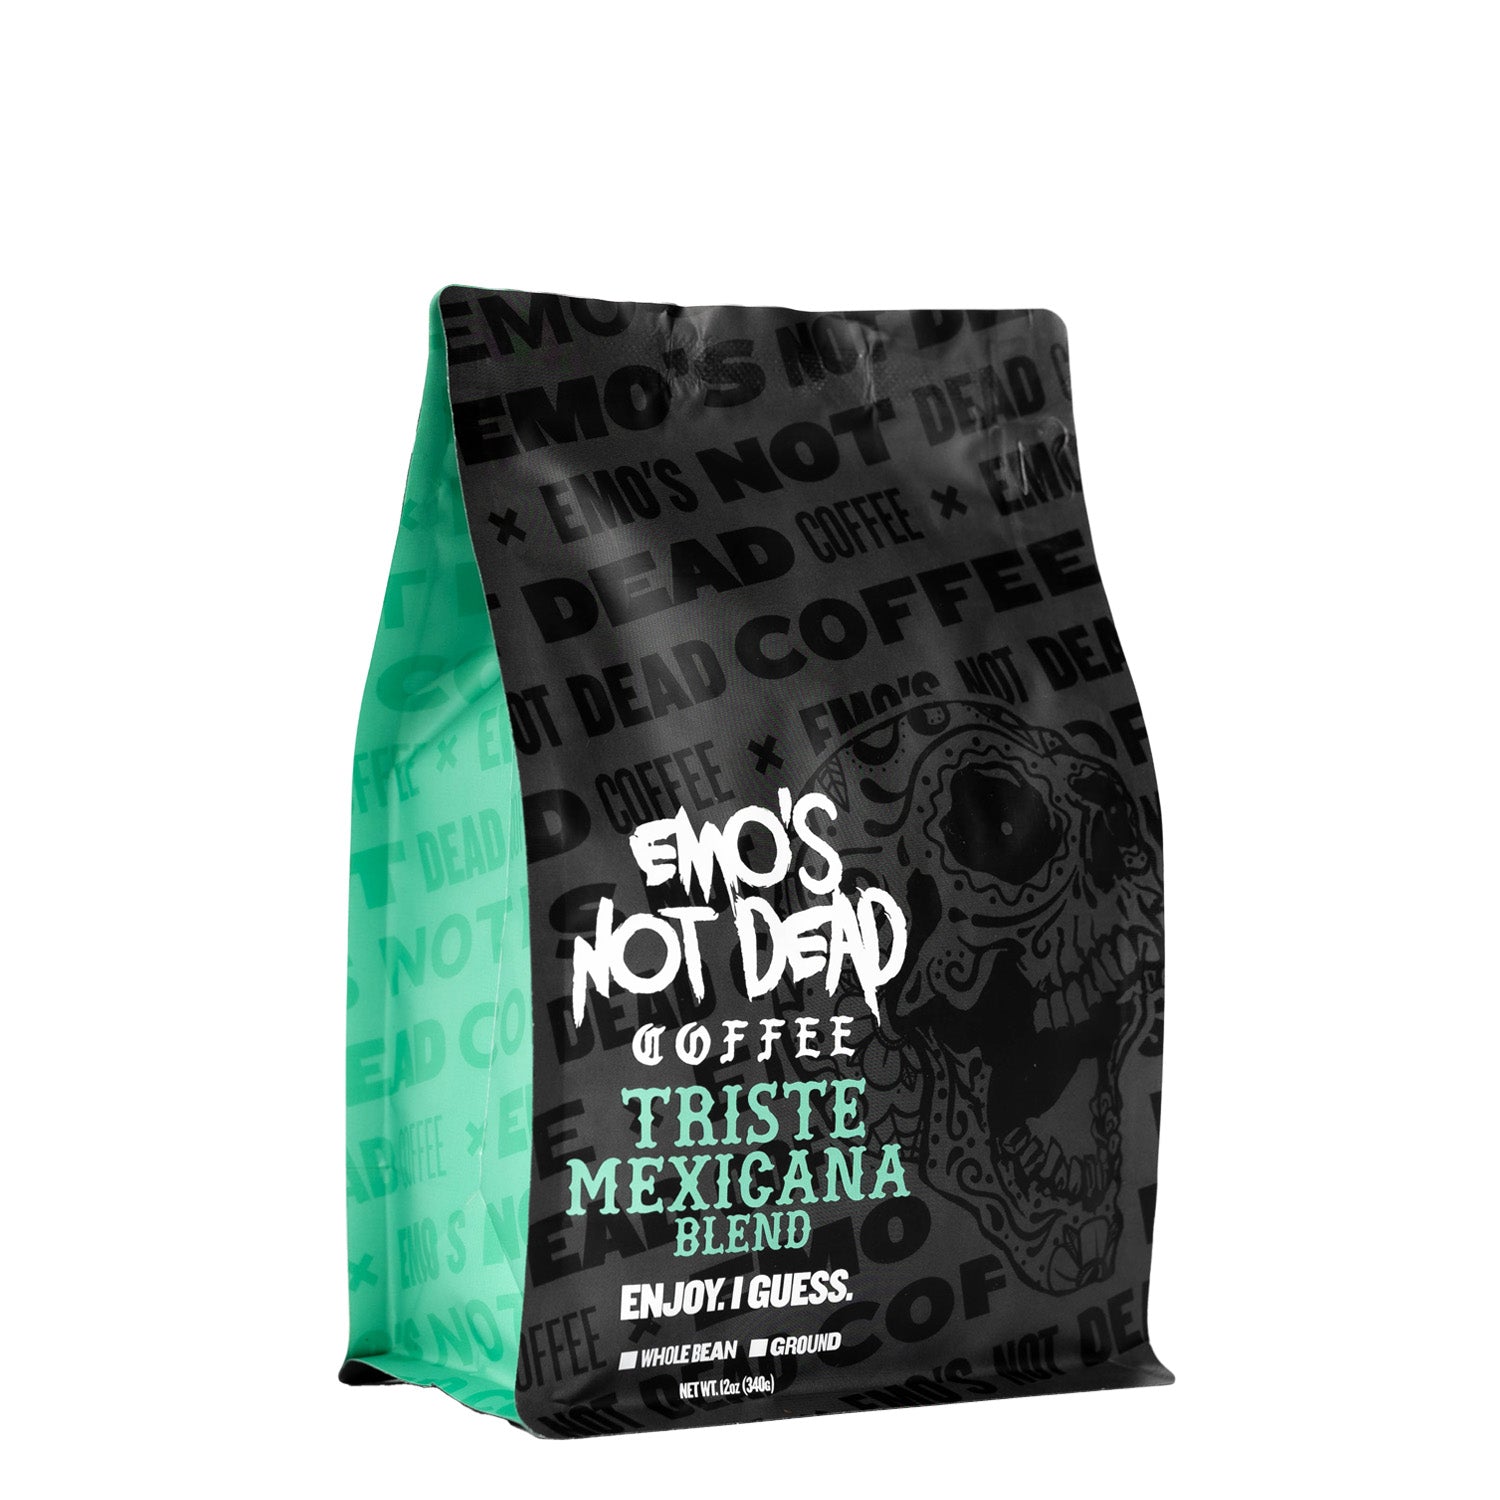 Emo’s Not Dead, Band Merch, Triste Mexicana Blend Coffee